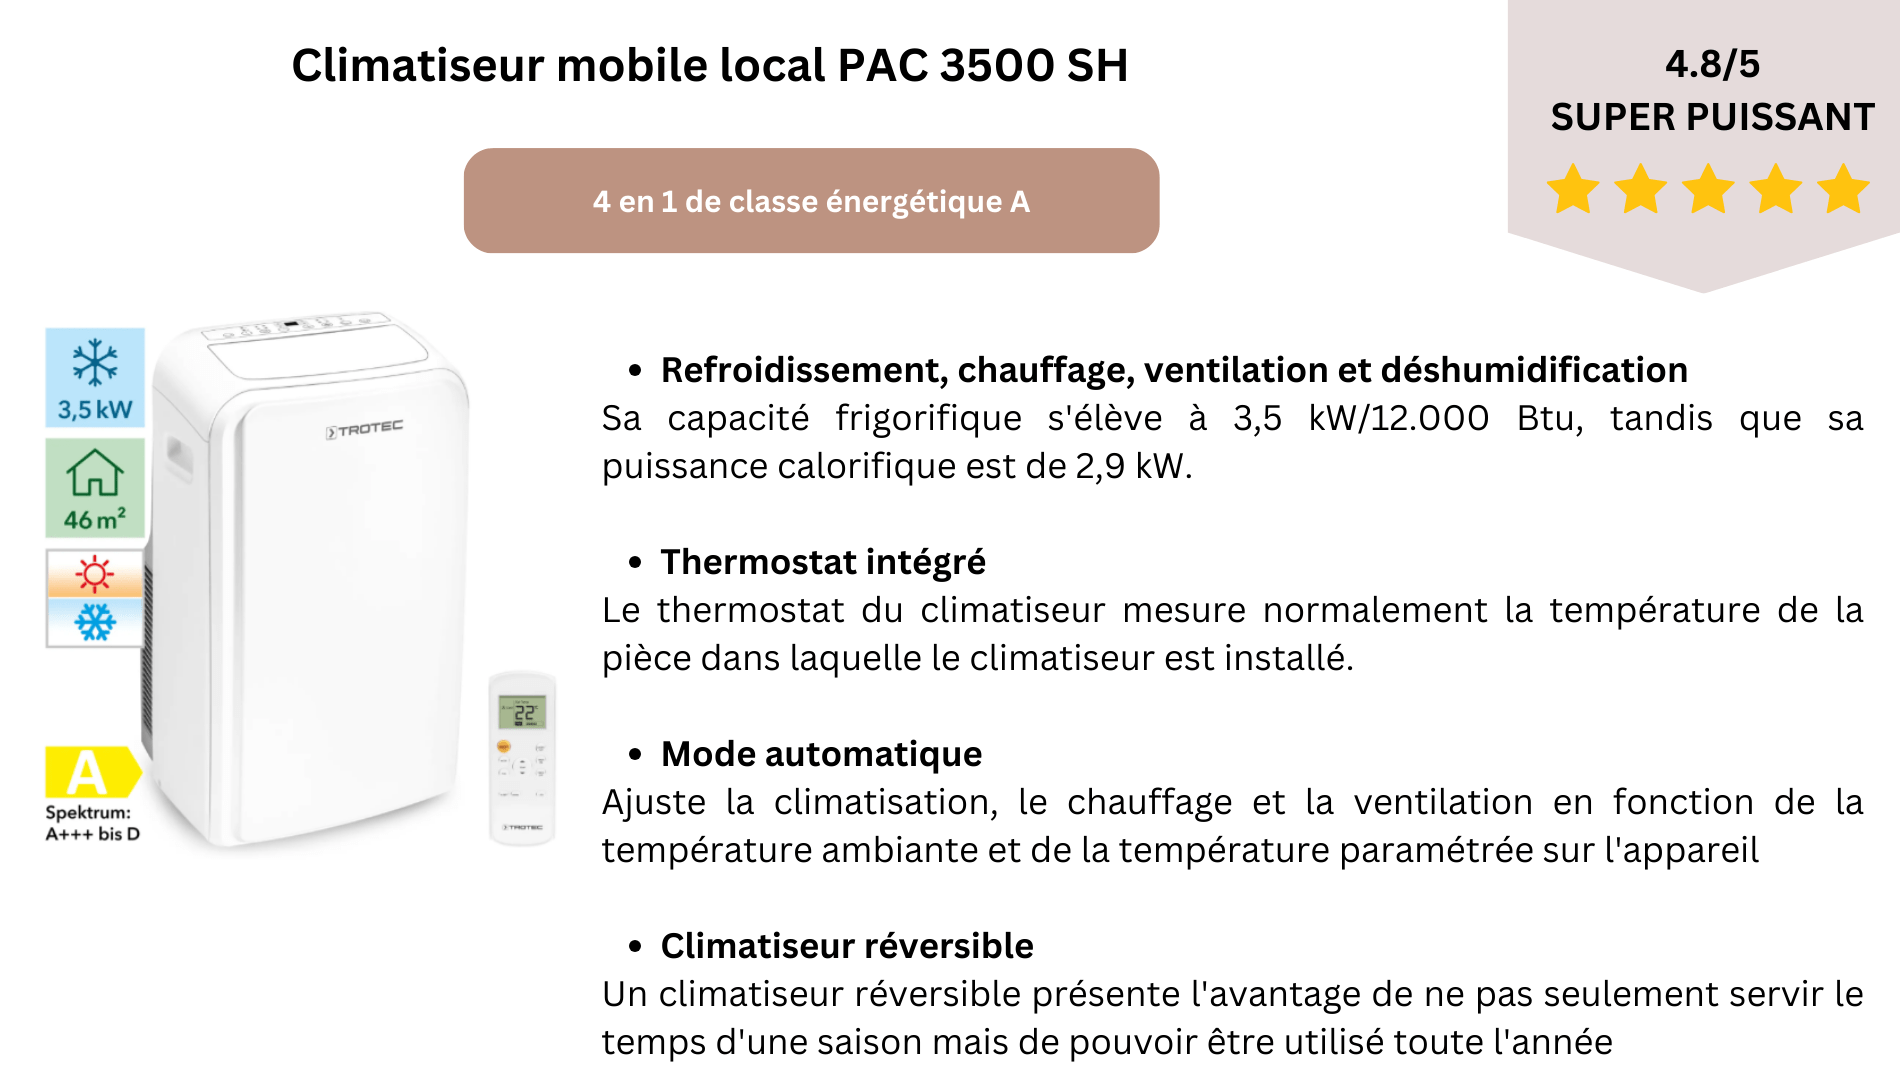 Climatiseur mobile local PAC 3500 SH